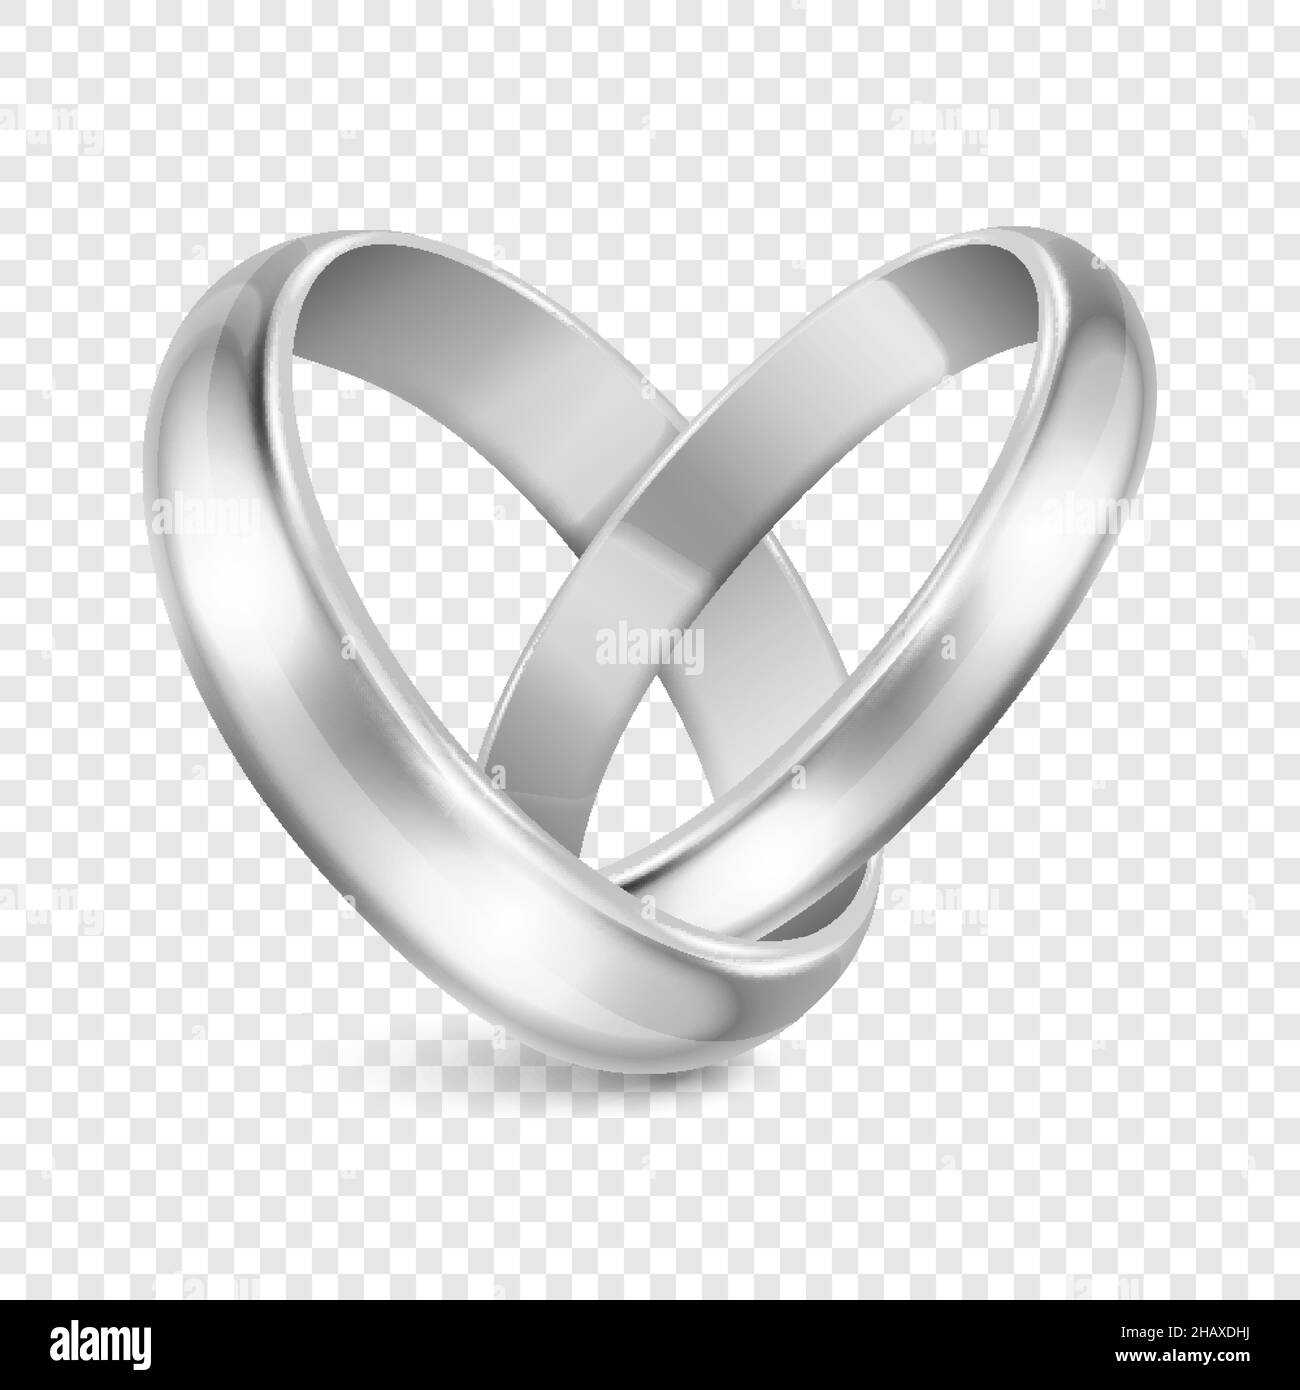 Vector 3d Realistic Silver Metal Wedding Ring Set Closeup. Design Template of Shiny Rings in the Shape of Heart. Wedding, Engagement, Love, Romantic Stock Vector